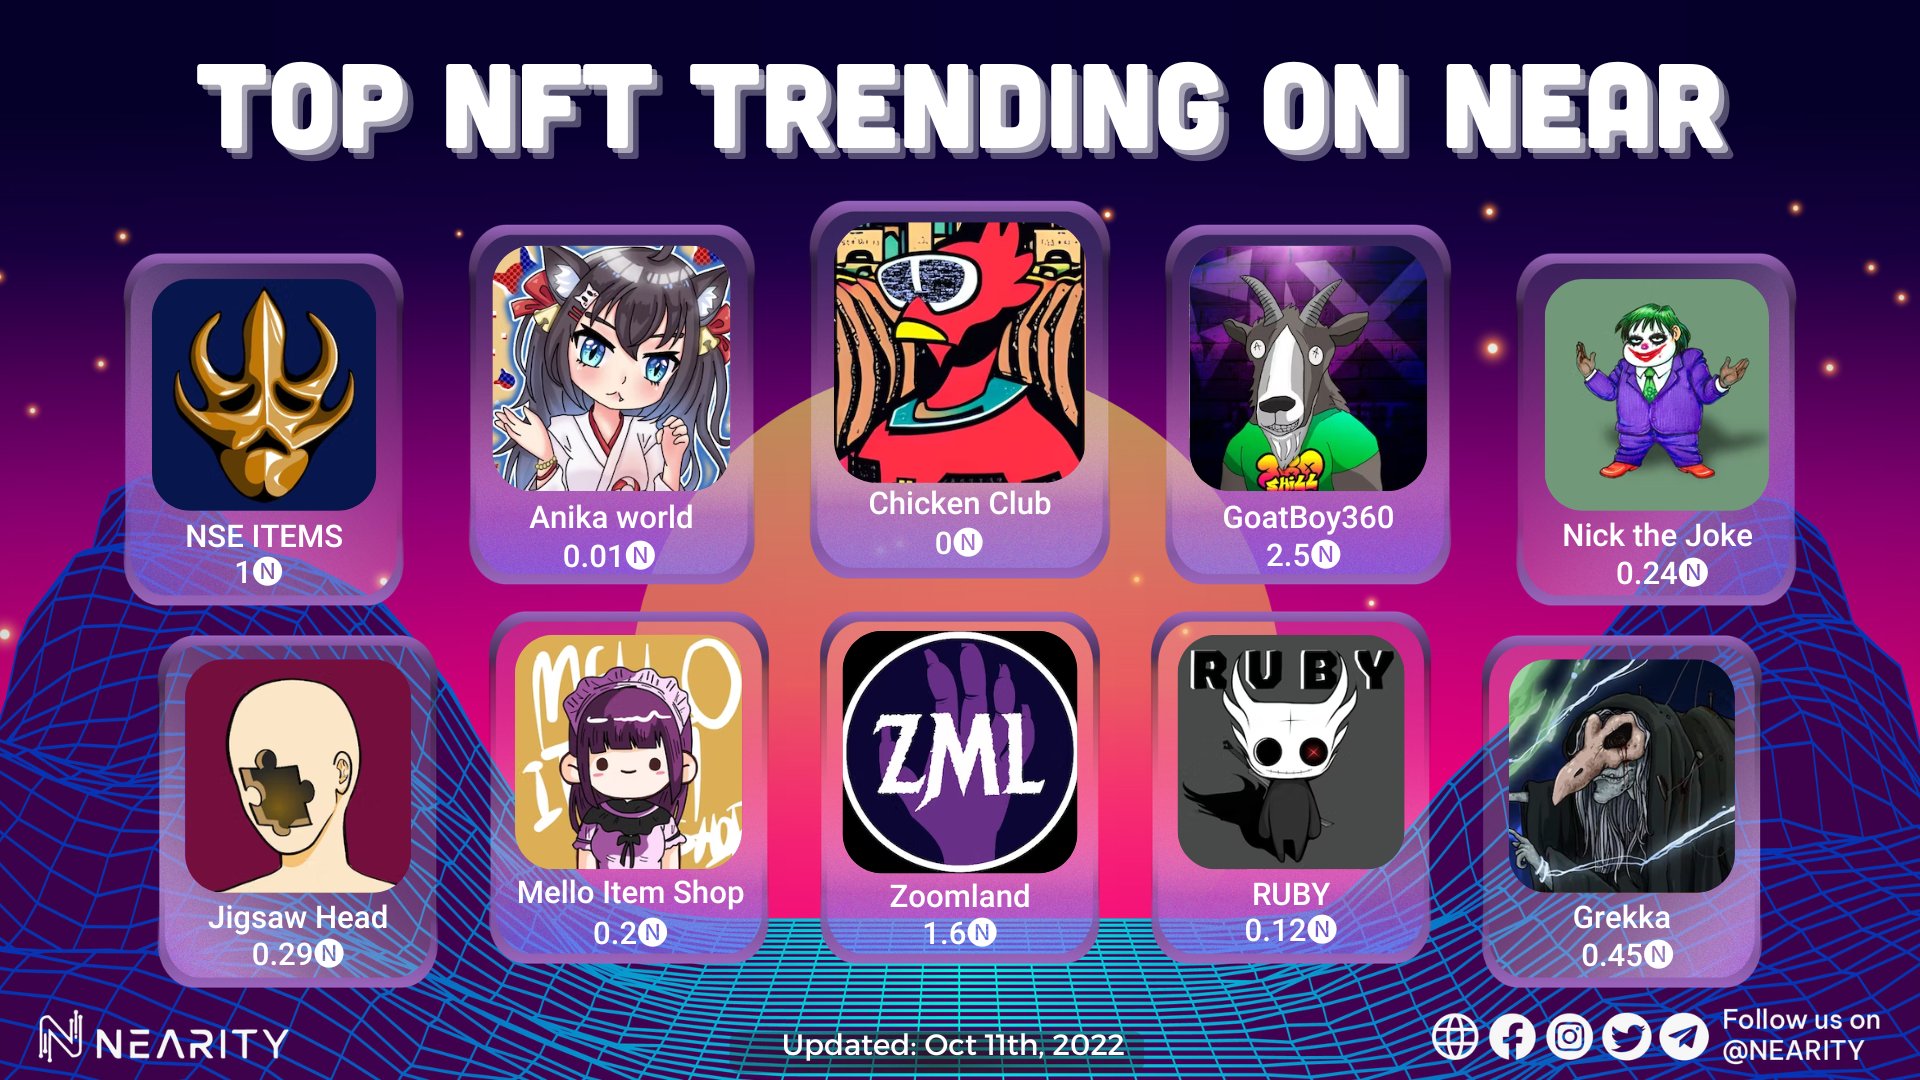 Top of #NFT trending super products on @NEARProtocol Wishing you all a brilliant October Don't miss any amazing items on https://t.co/nblzdGca3q #NEAR #Nearity #NEARProtocol $NEAR #NFT #NFTs #NFTCommunity #nftart #NFTProject #web3 #Crypto 